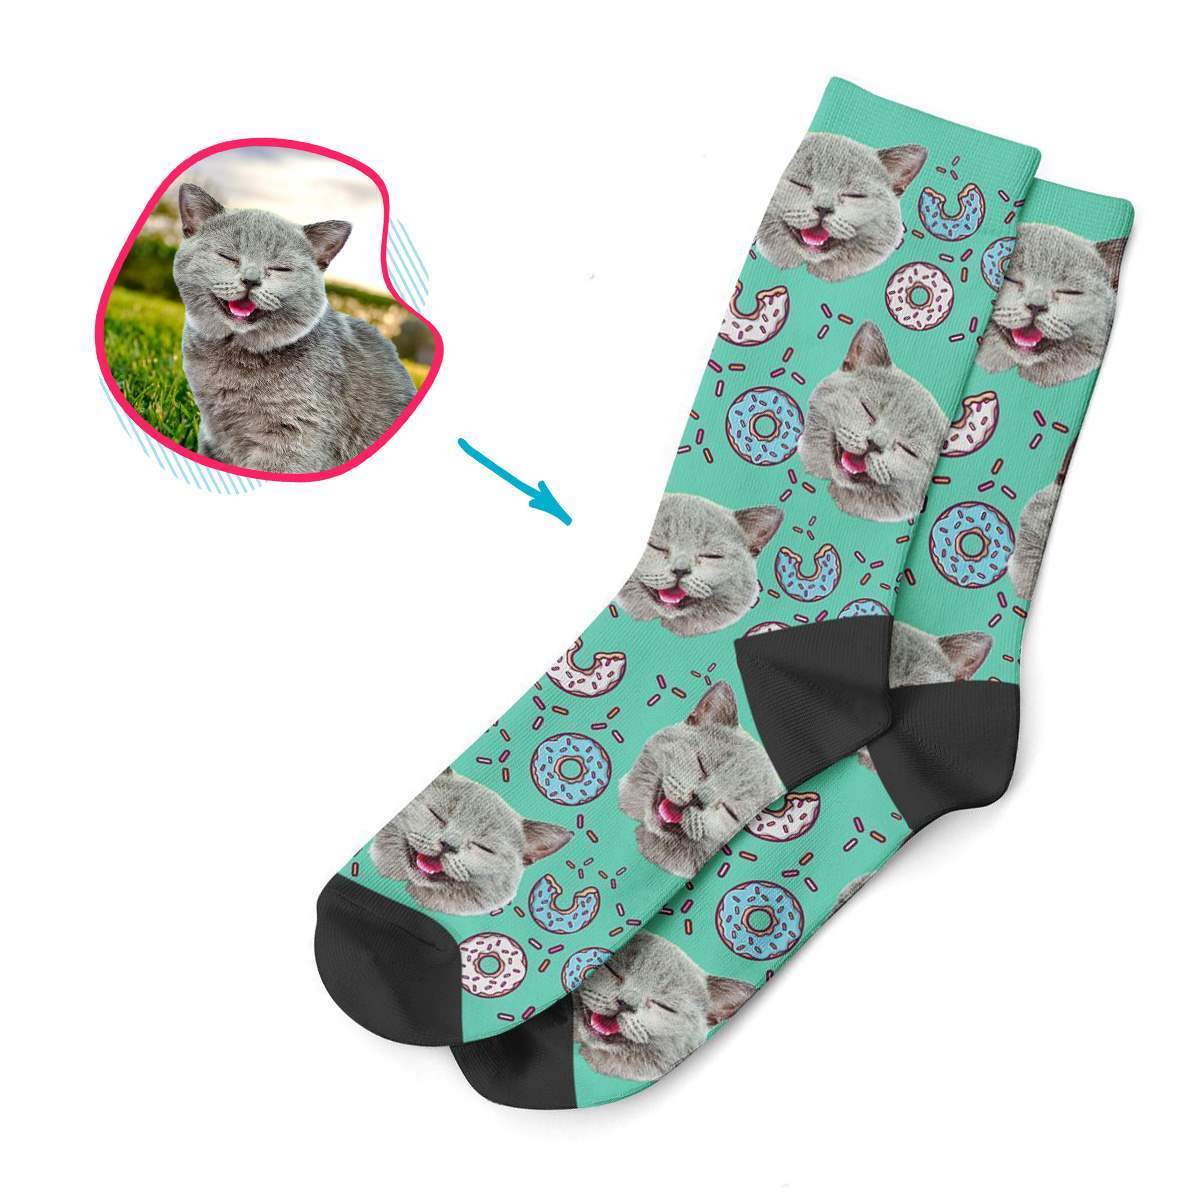 mint Donuts socks personalized with photo of face printed on them